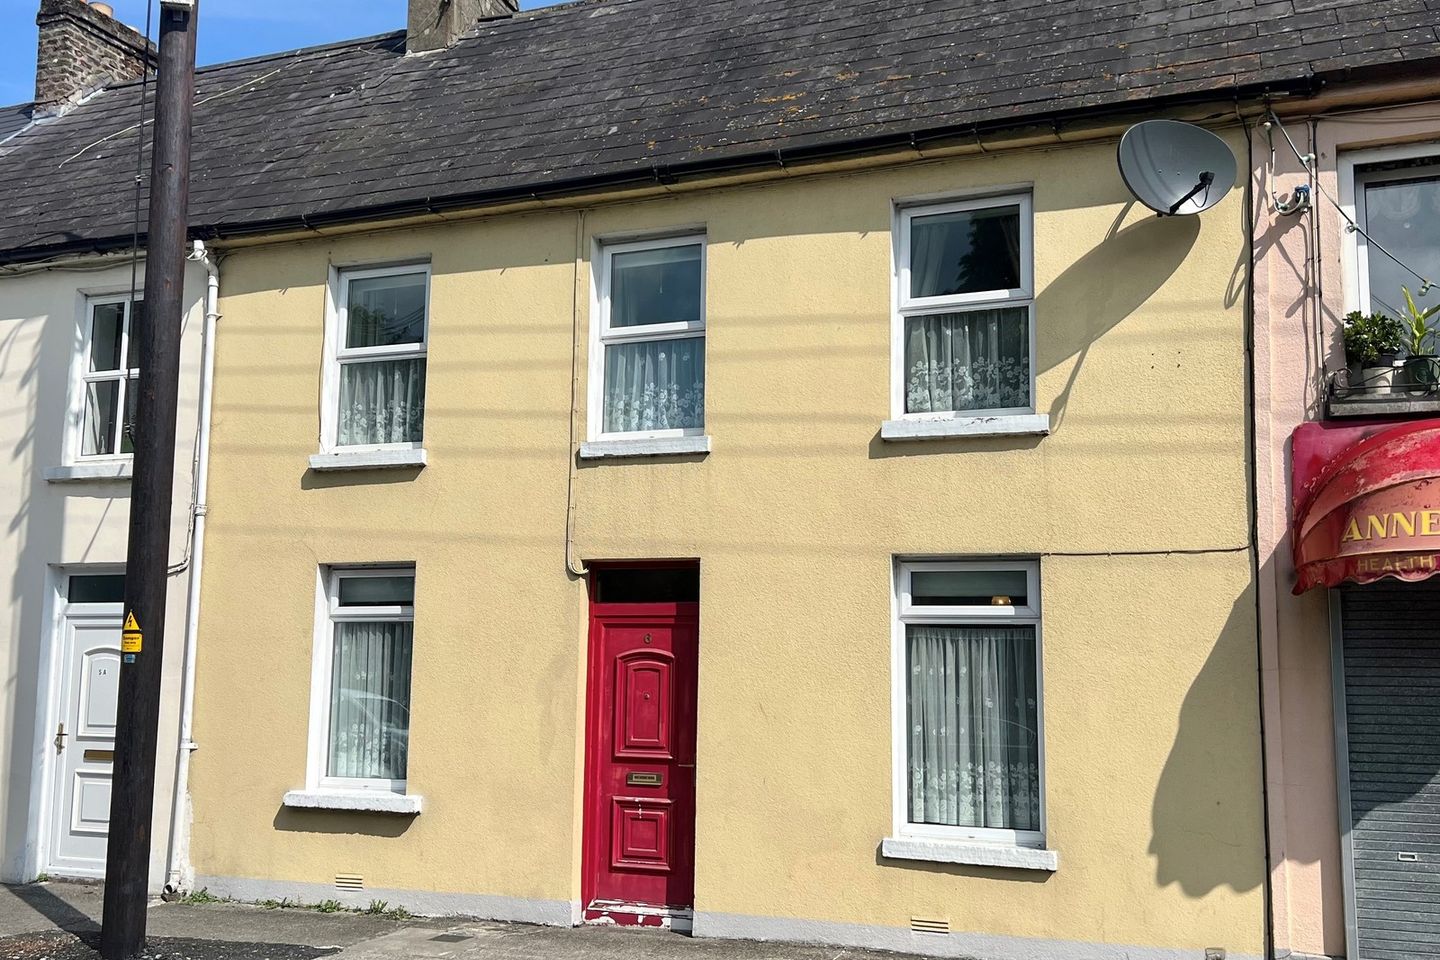 6 Abbey Street, Tipperary Town, Co. Tipperary, E34XF84